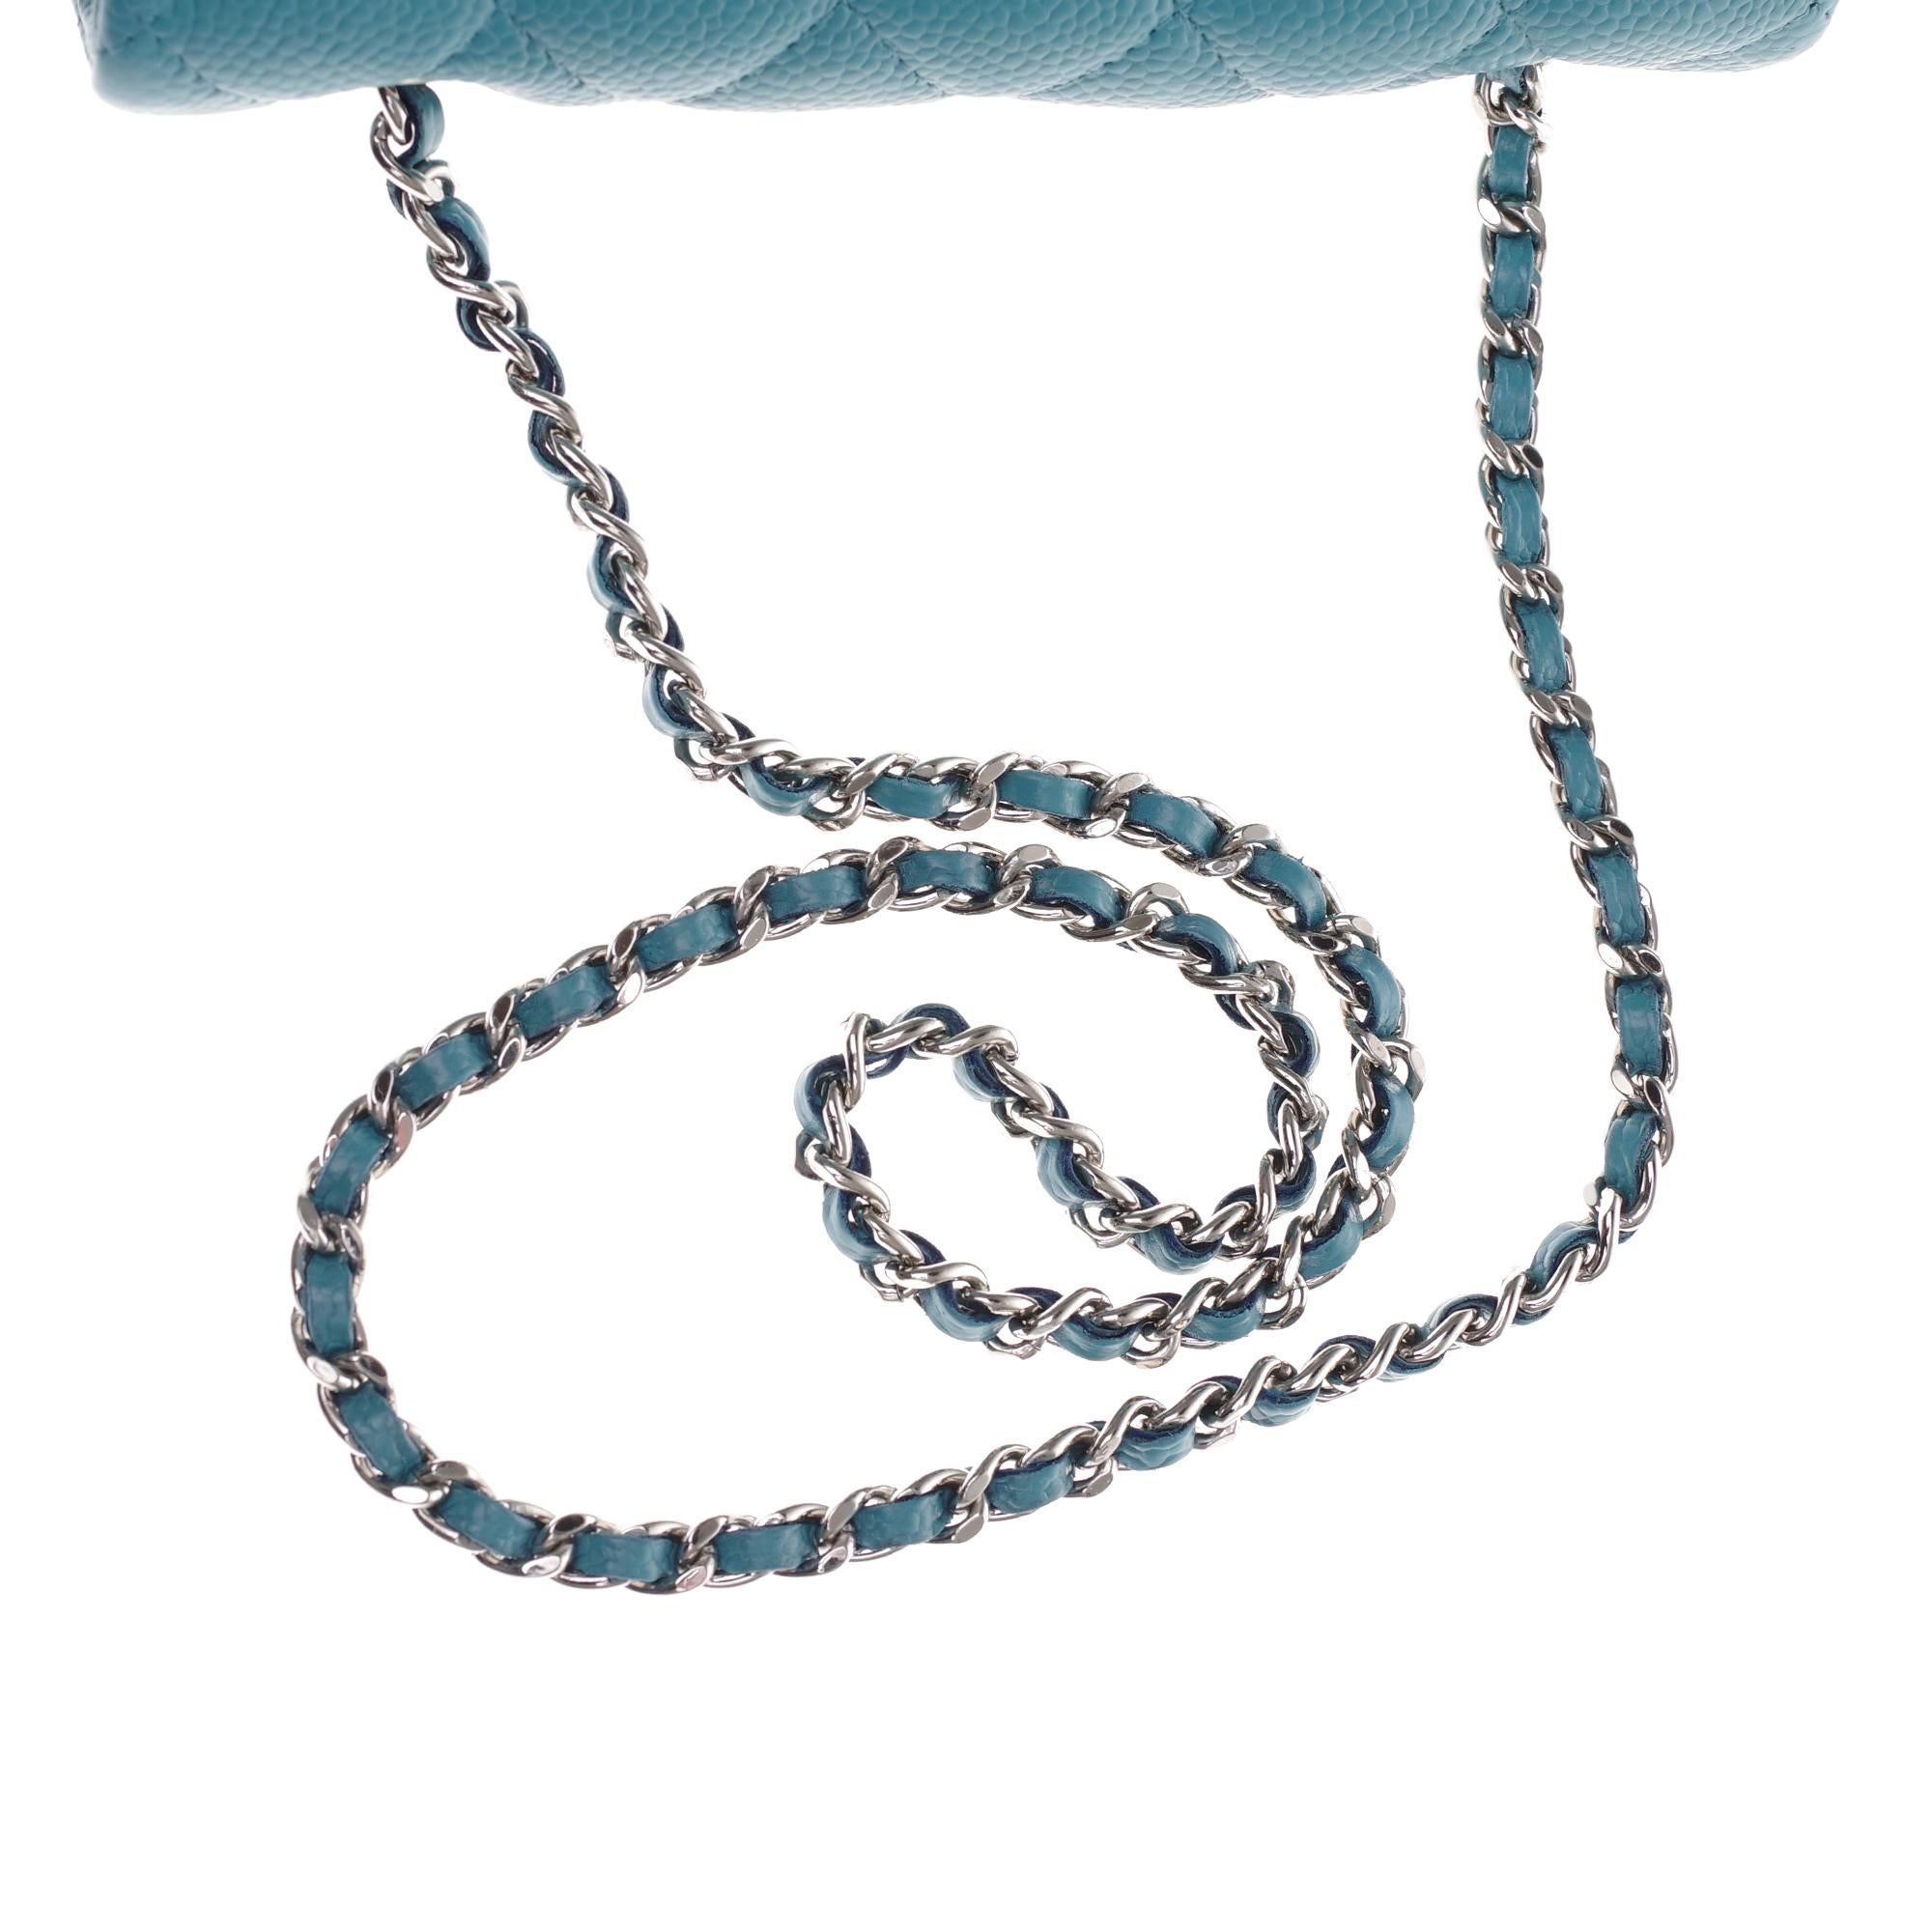 Stunning Mini Chanel shoulder bag in turquoise caviar leather, silver hardware 2